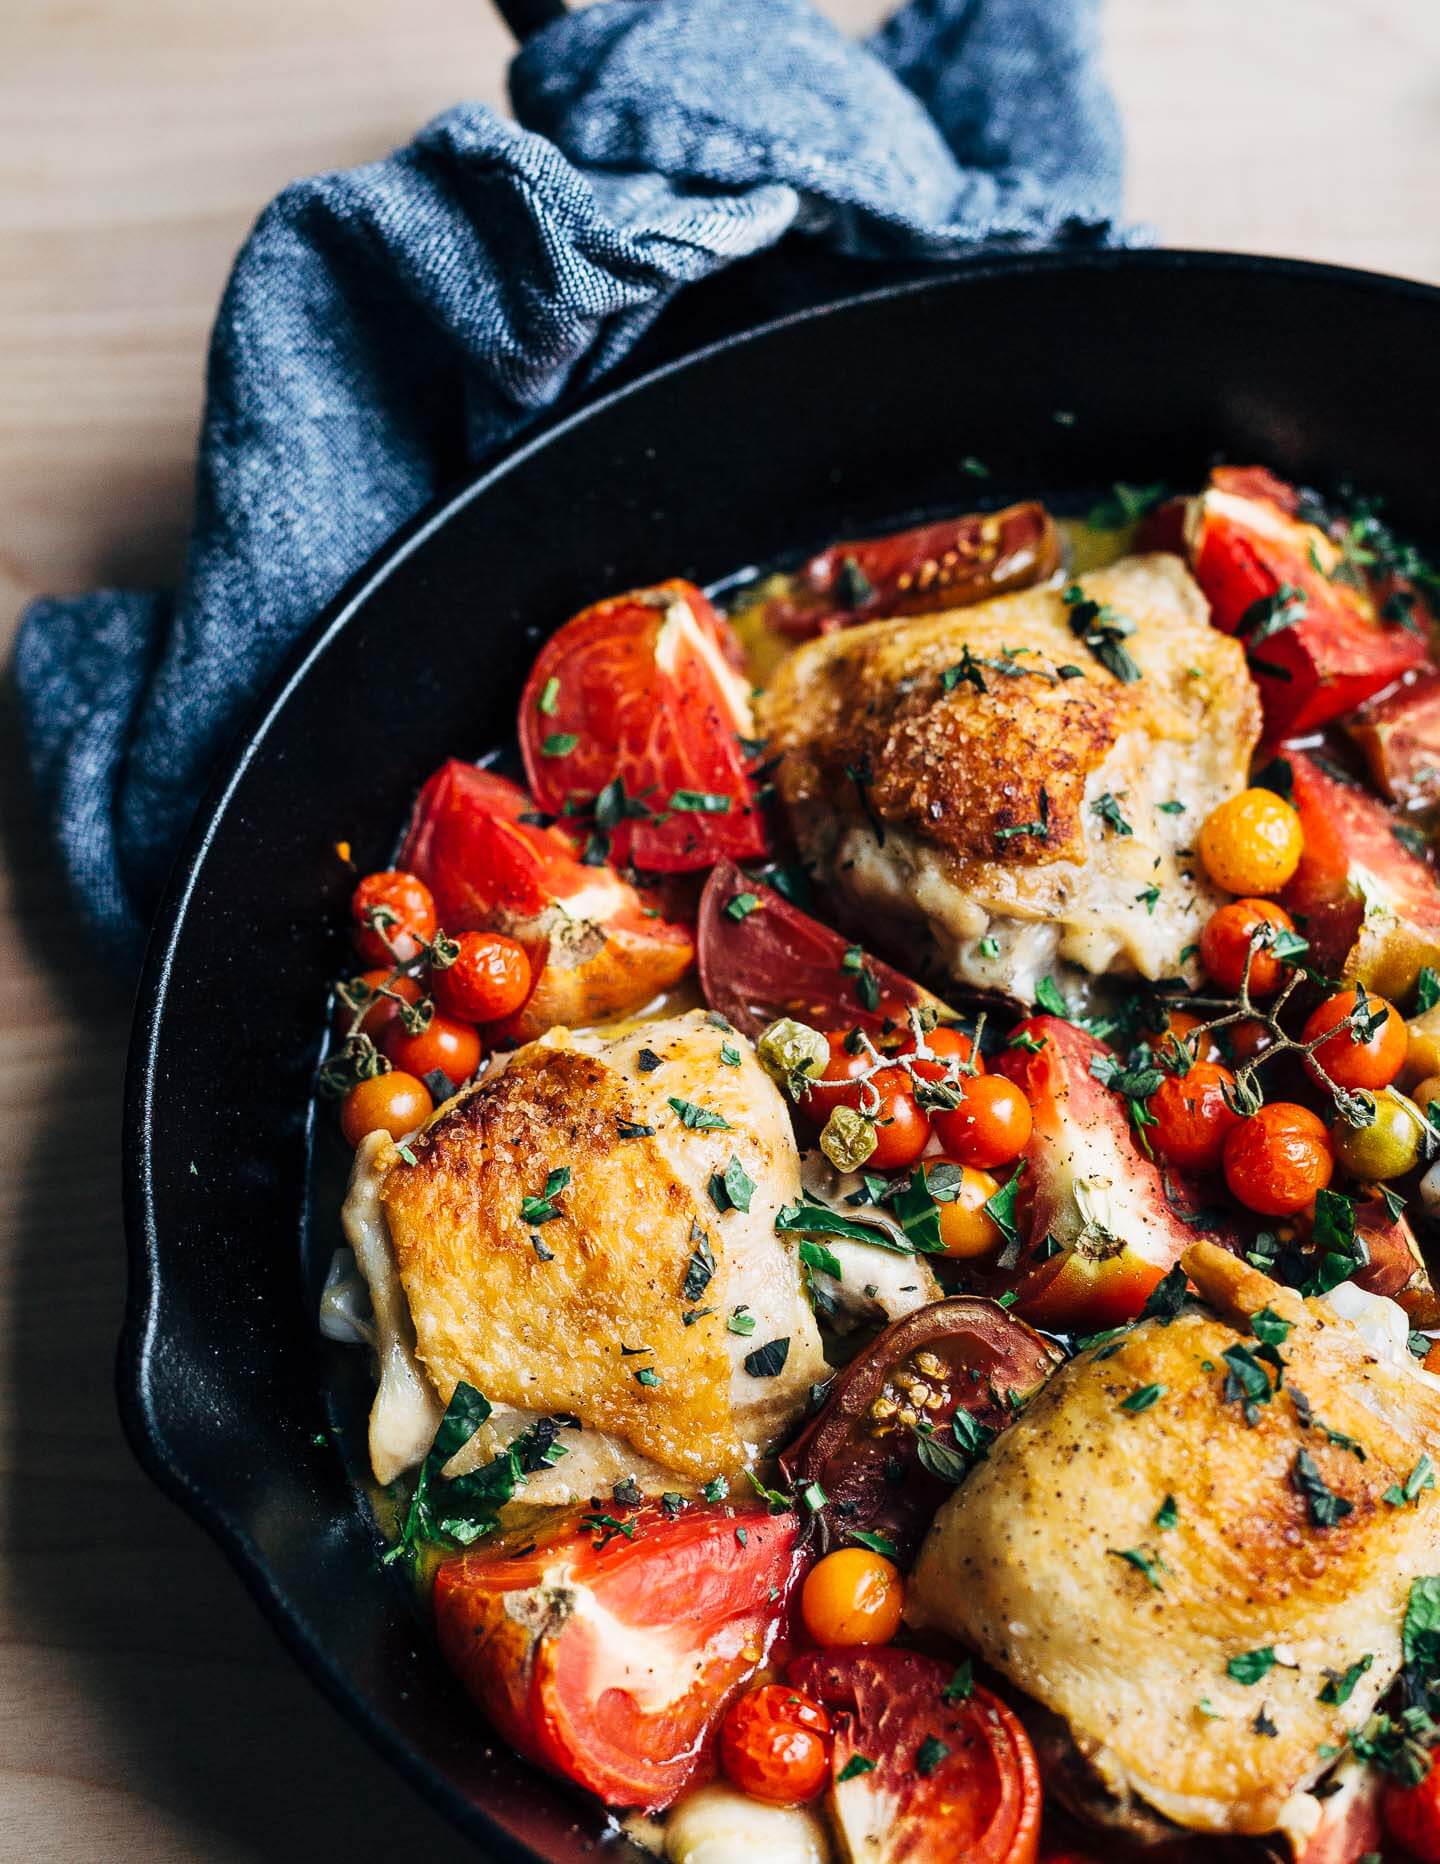 A simple recipe for one-skillet baked chicken with tomatoes, garlic, and fresh herbs. Chicken thighs are seared until crispy and golden in a cast iron skillet, and then baked up with tomatoes and garlic. 